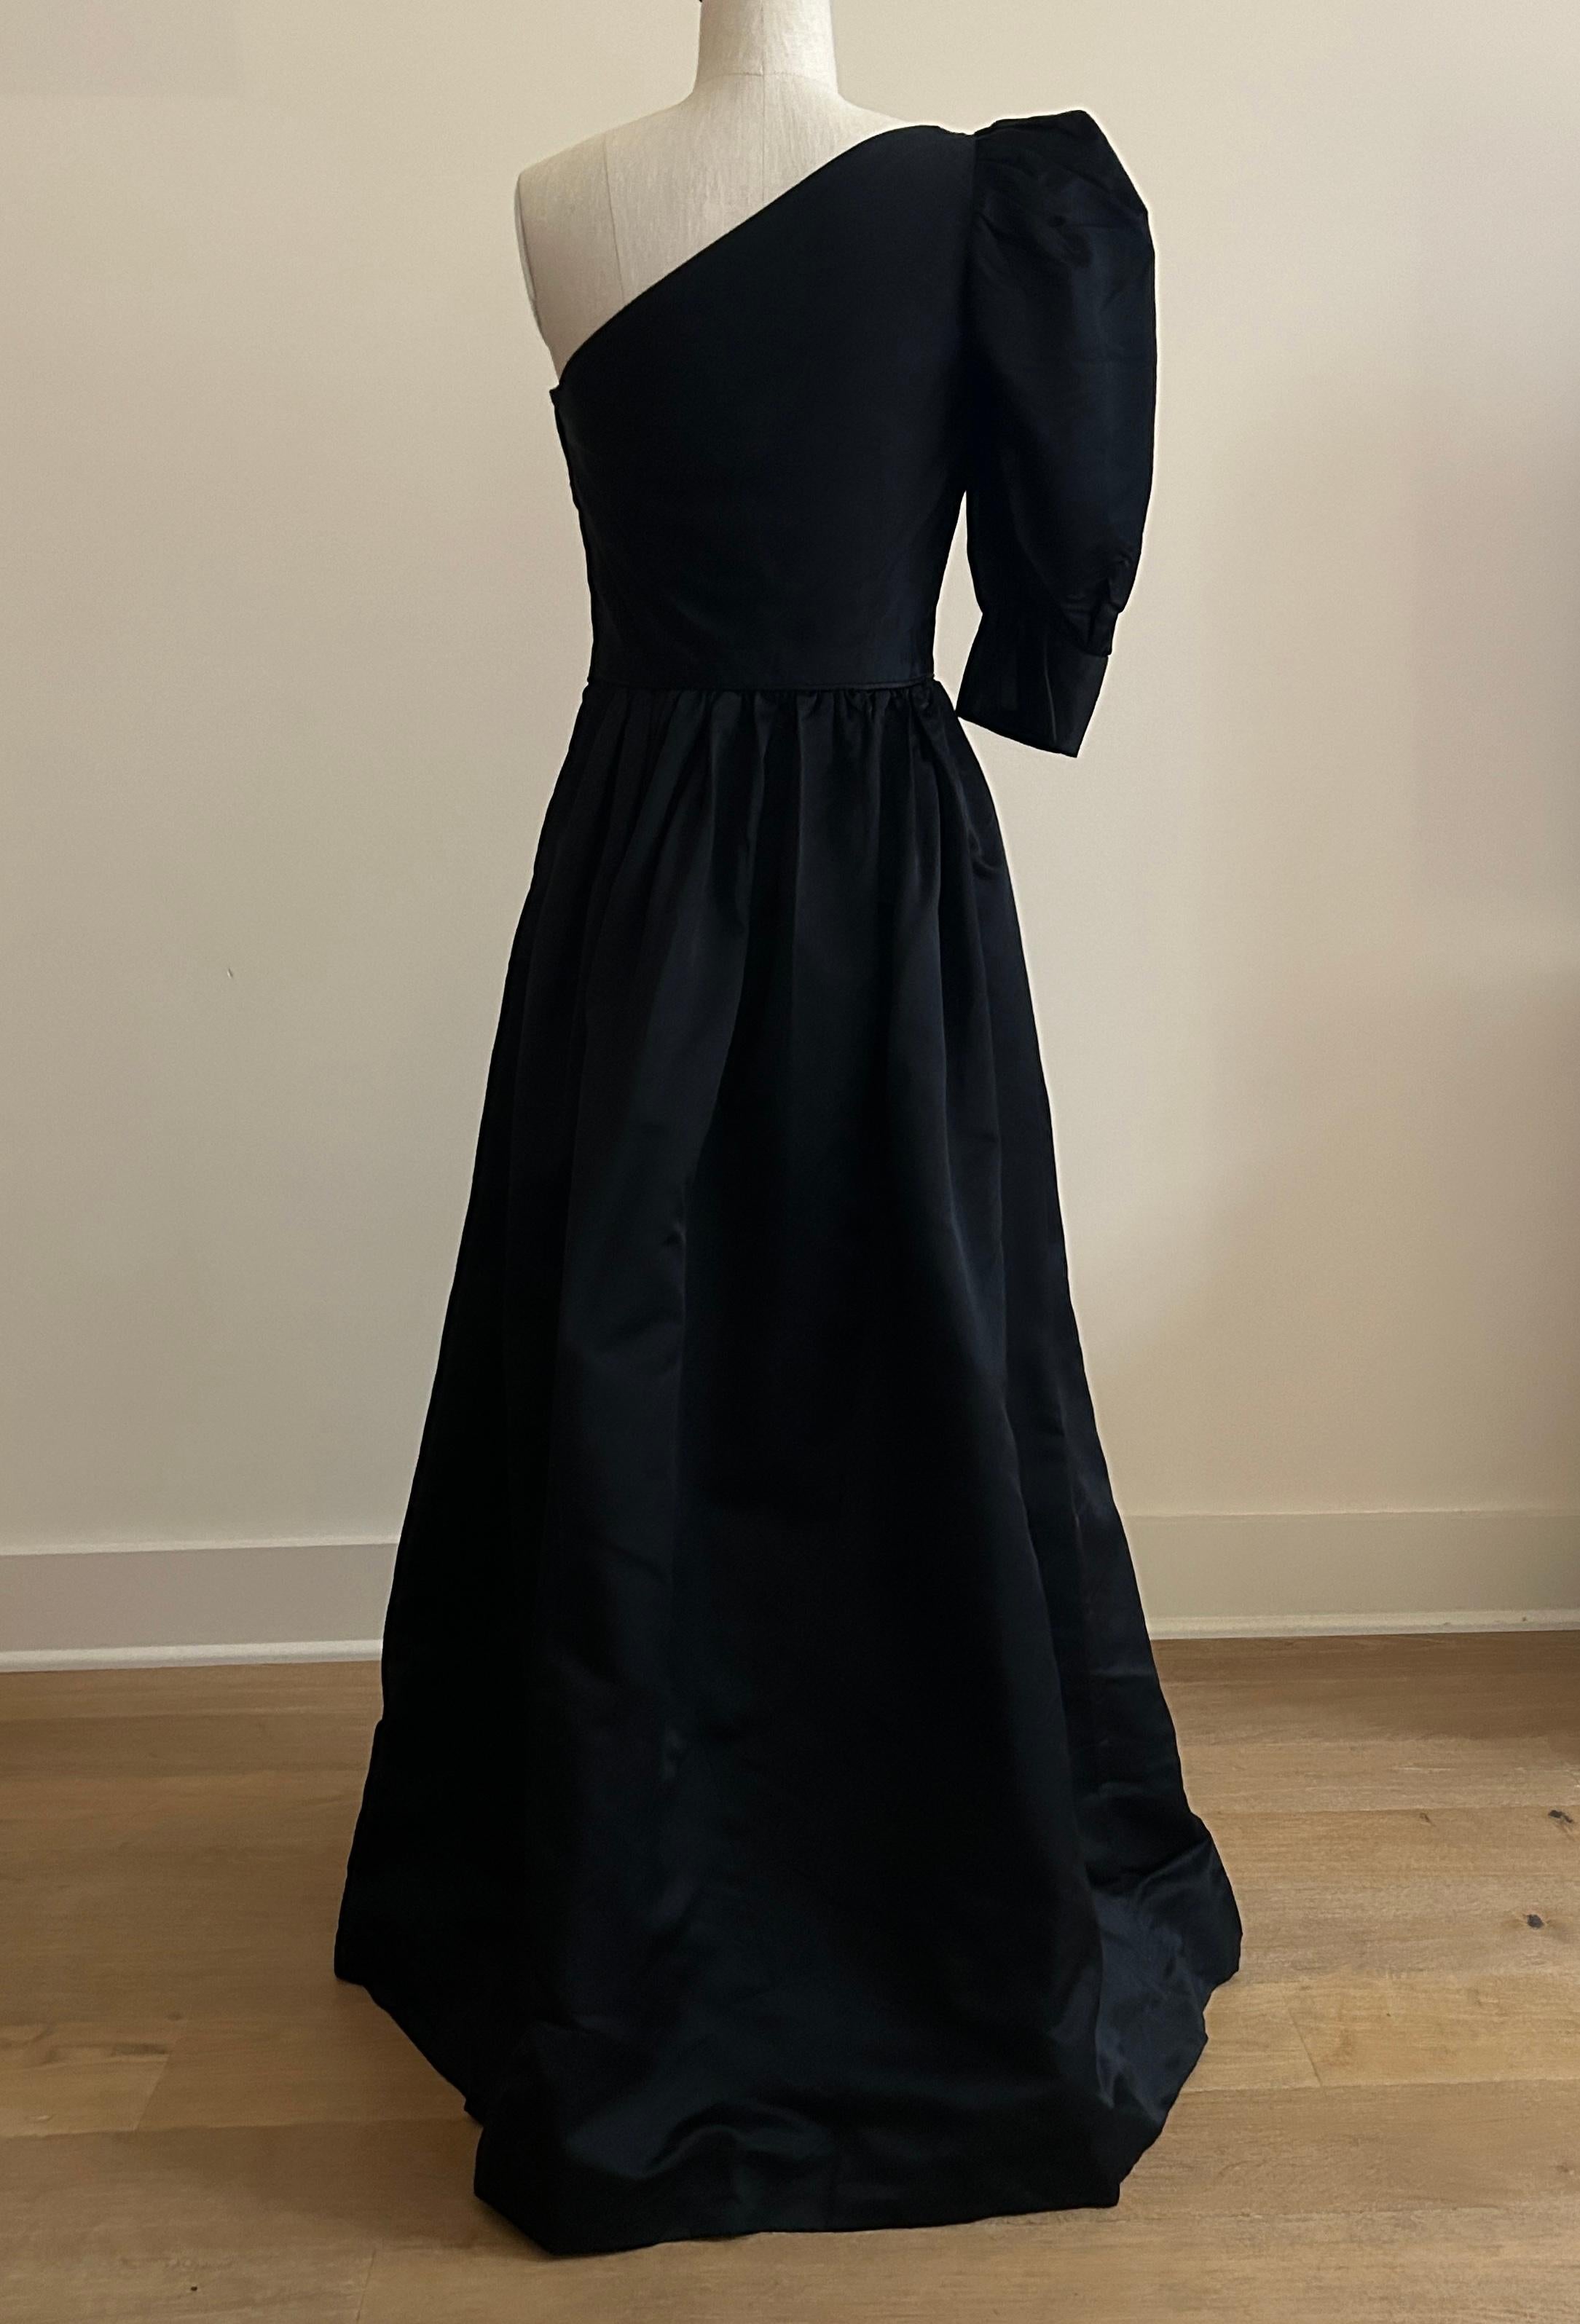 Alfred Bosand 1980s Black One Shoulder Asymmetric Gown with Rhinestone Bow In Good Condition For Sale In San Francisco, CA